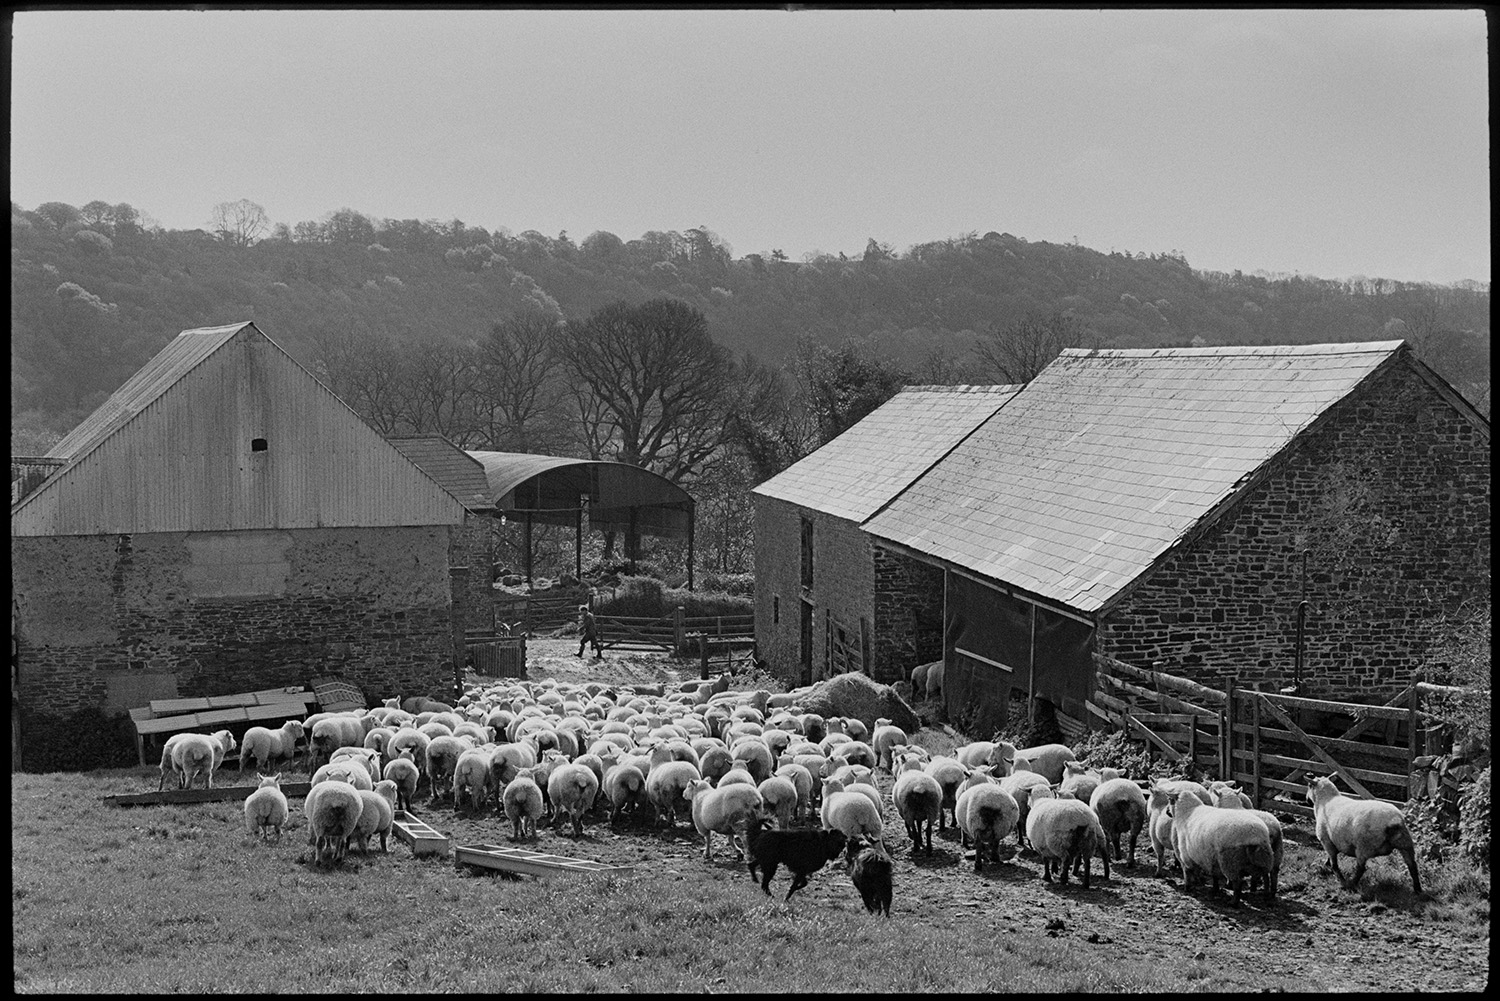 Flock of sheep going into farmyard. 
[Two dogs herding sheep into the farmyard at Greatwood, Merton. Stone barns and trough can be seen in the farmyard.]